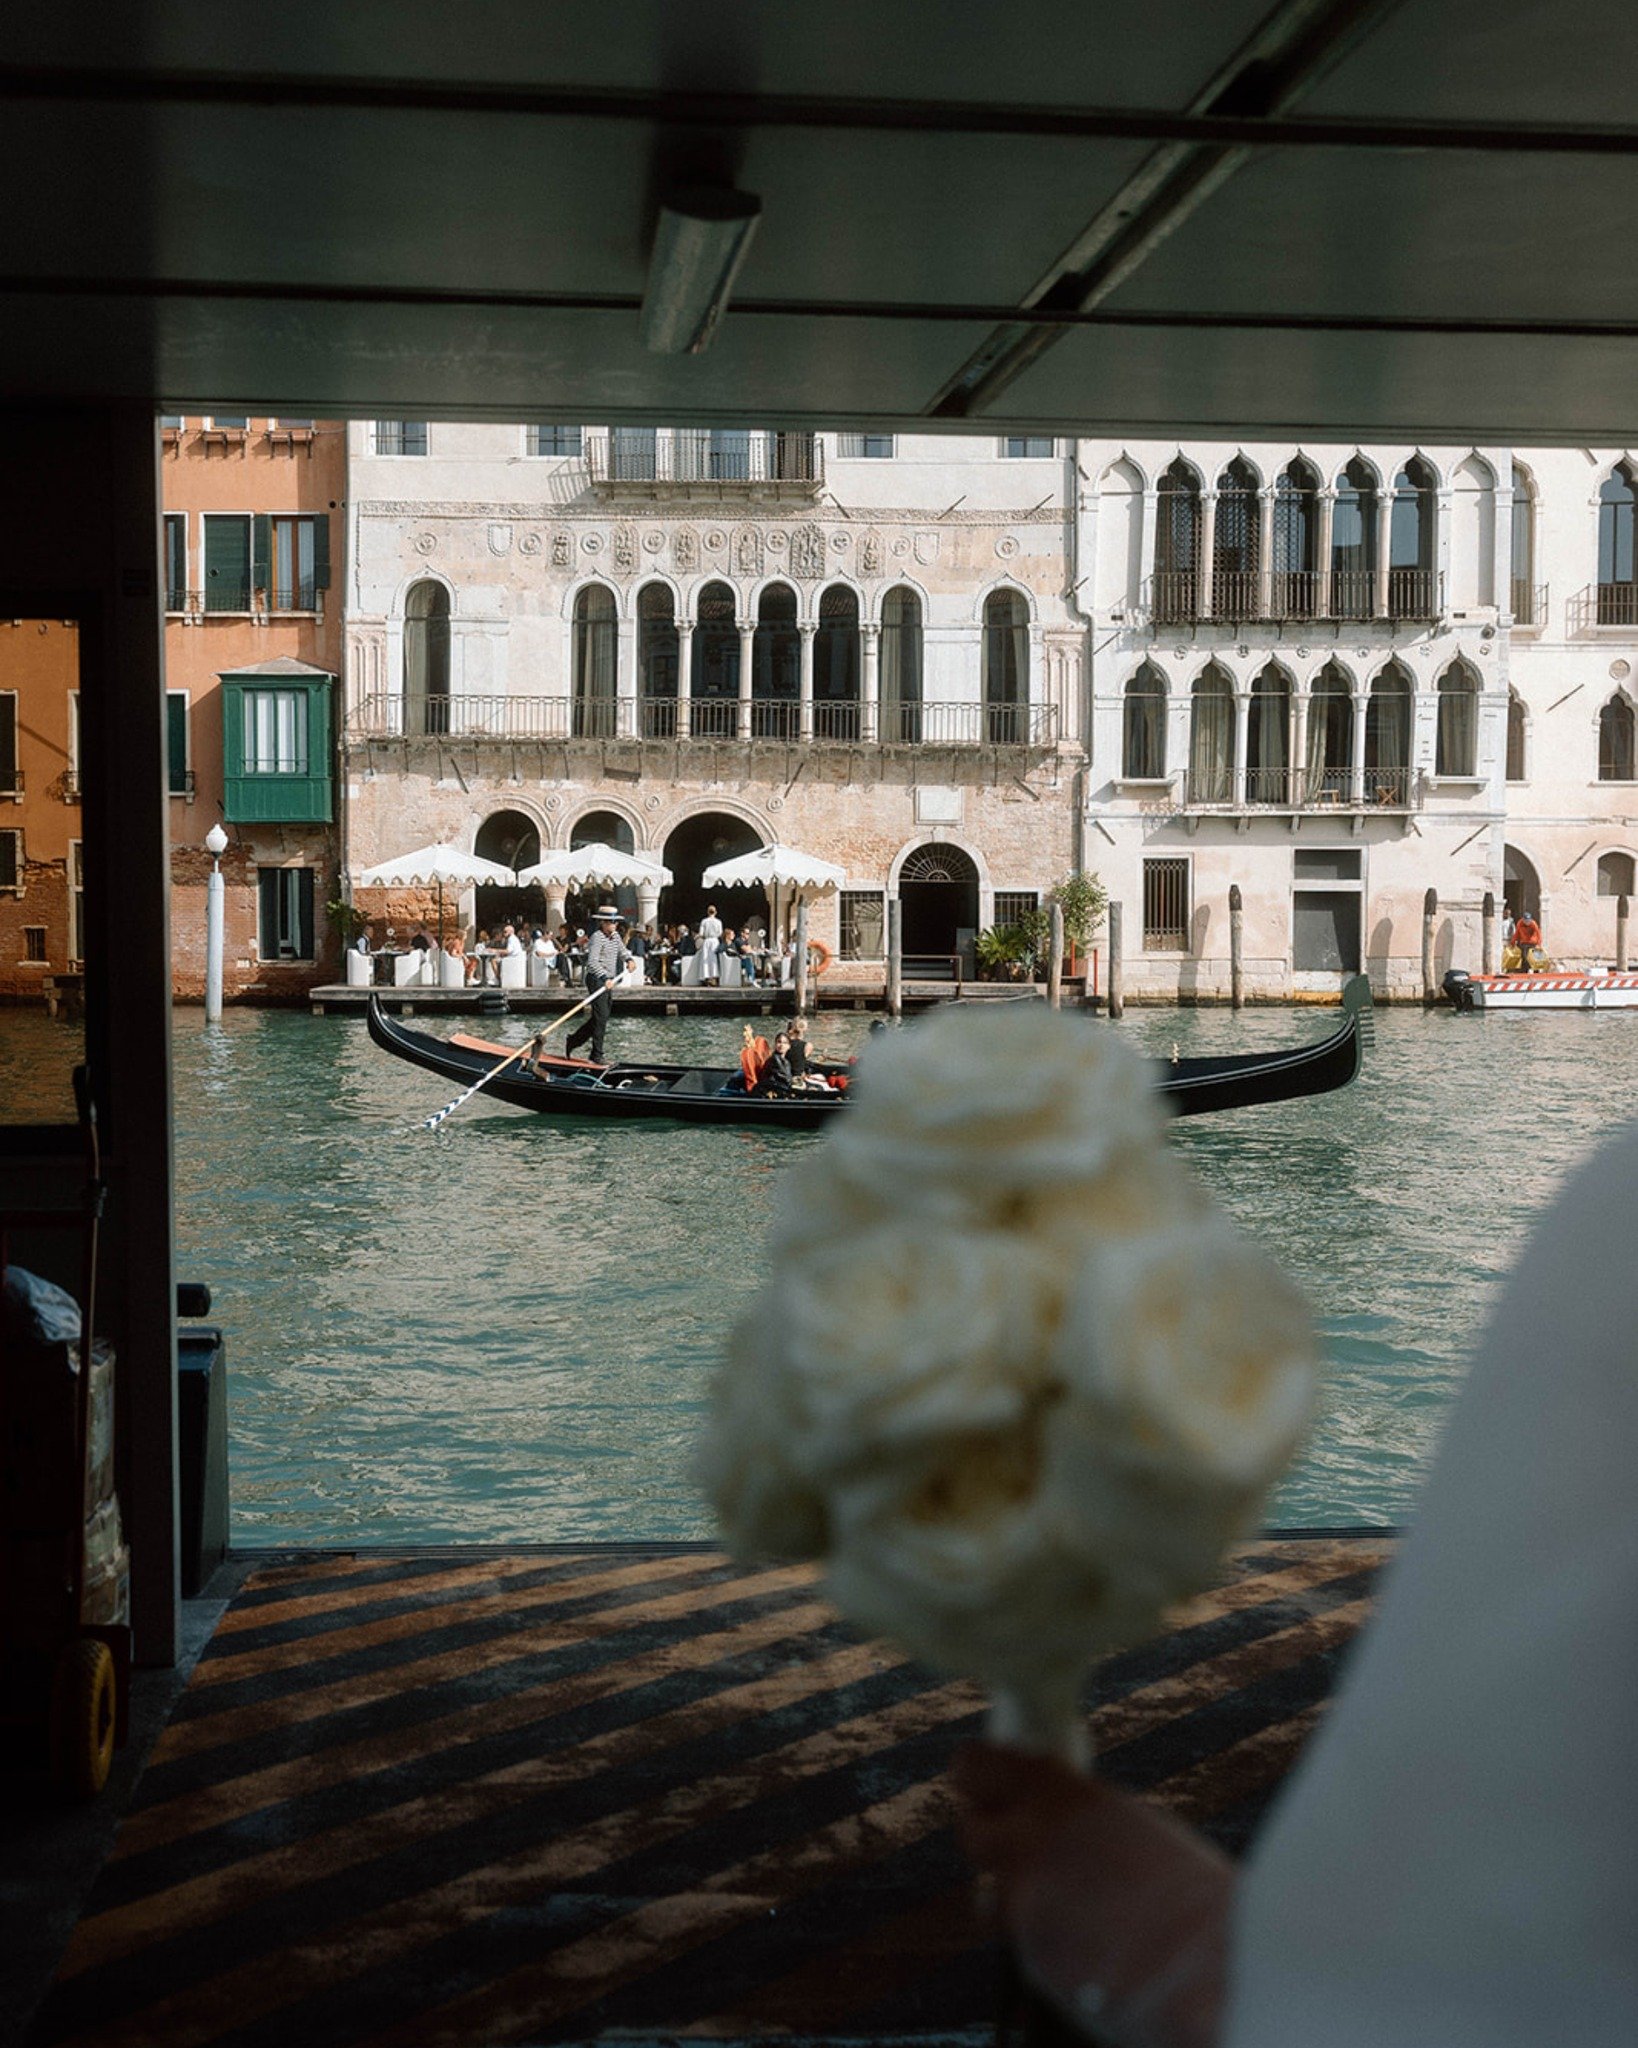 Isabella and Albert's elopement in Venice, the birthplace of their love, was a refined affair from start to finish.

Their journey together had its origins in the winding canals and romantic ambiance of Venice, making it the natural choice for their 